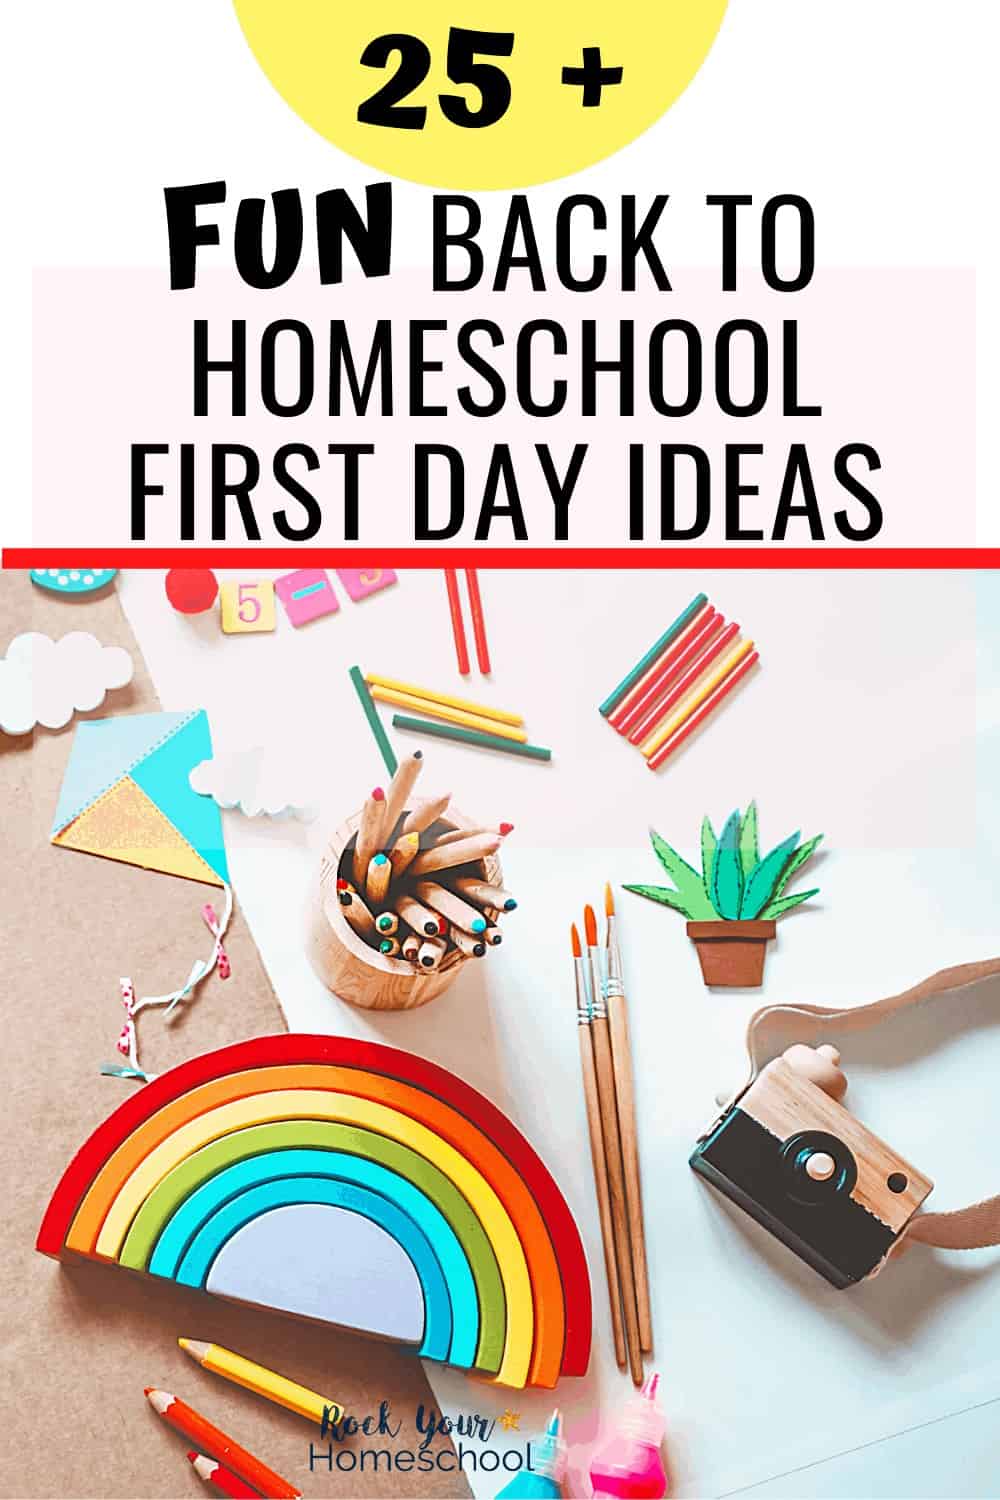 25+ Fun Back To Homeschool First Day Ideas